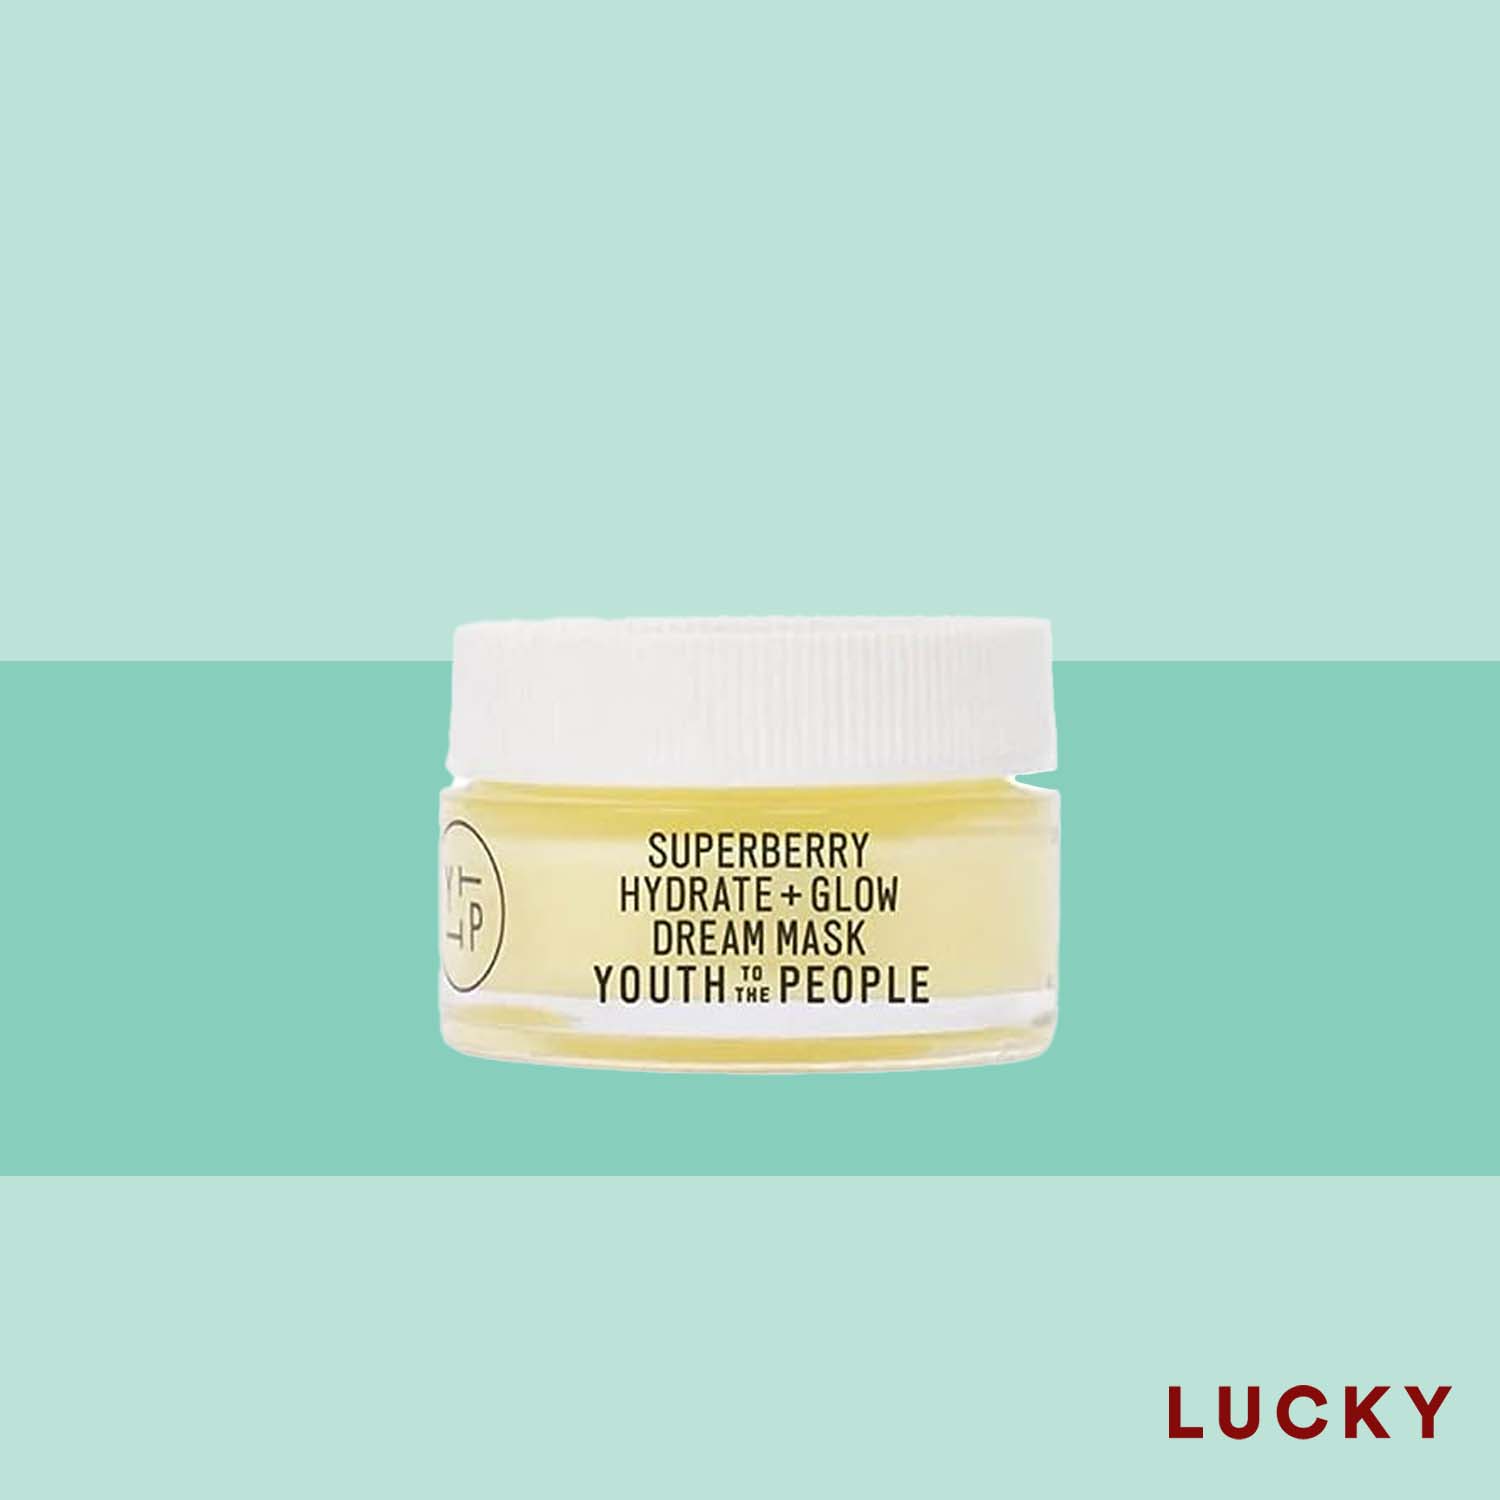 Youth To The People Superberry Hydrate Glow Dream Mask